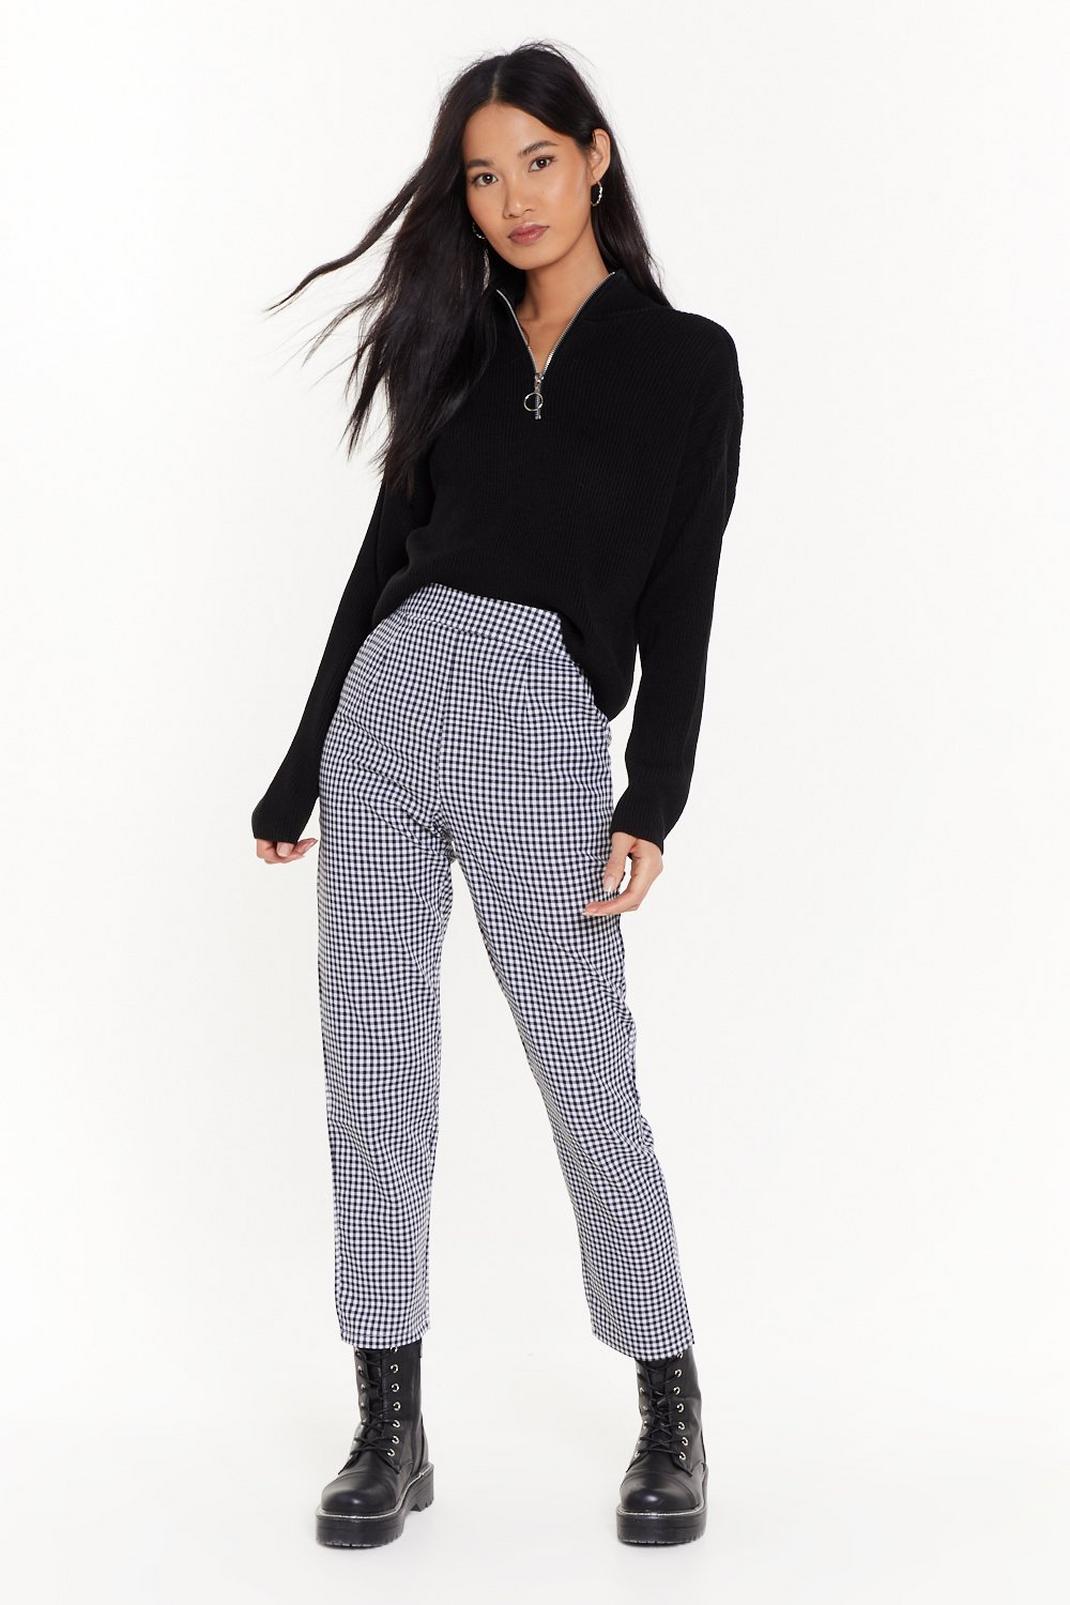 Gingham High-Waisted Pants with Tailored Silhouette | Nasty Gal